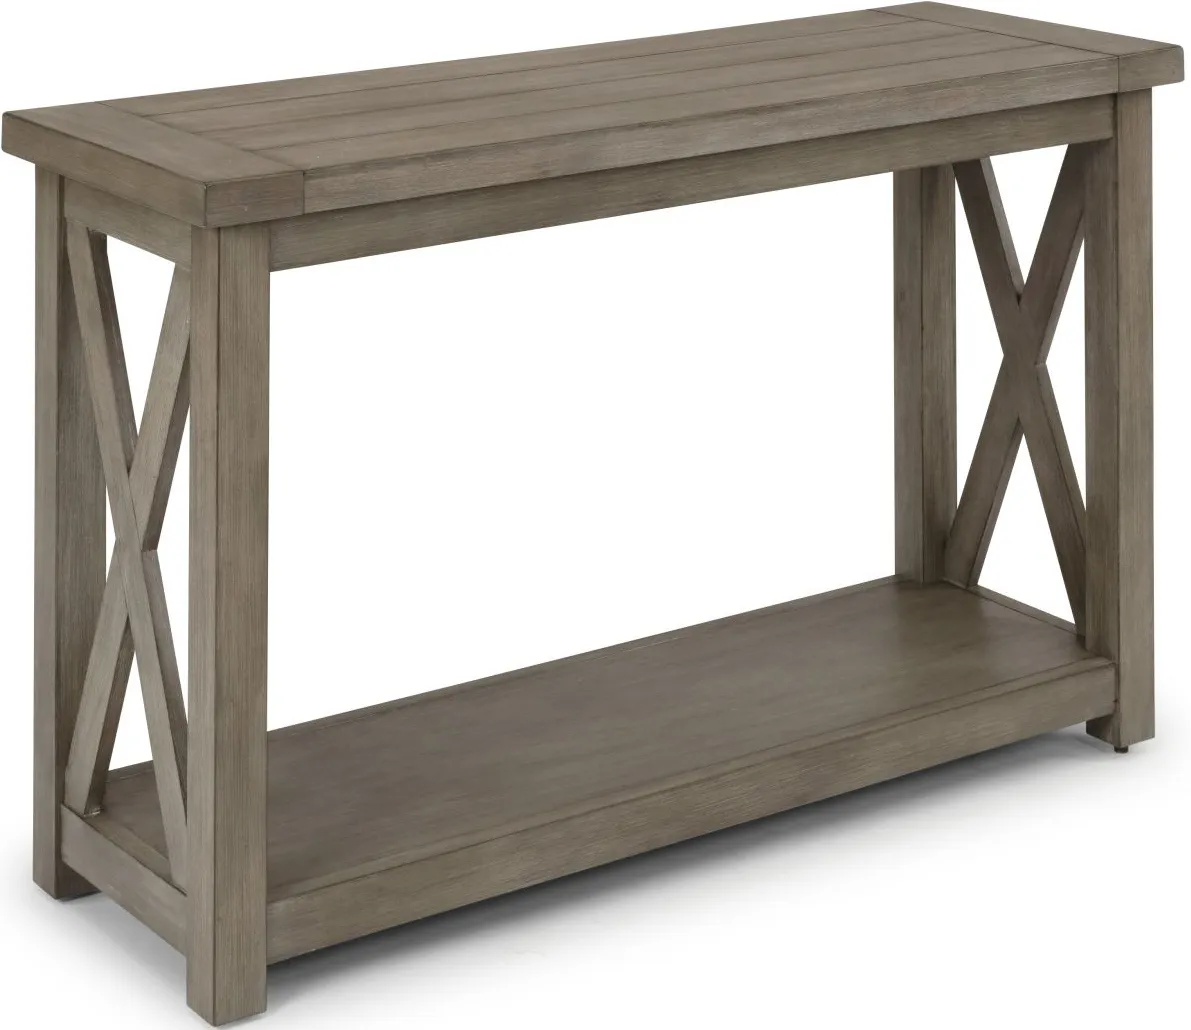 homestyles® Mountain Lodge Gray Console Table